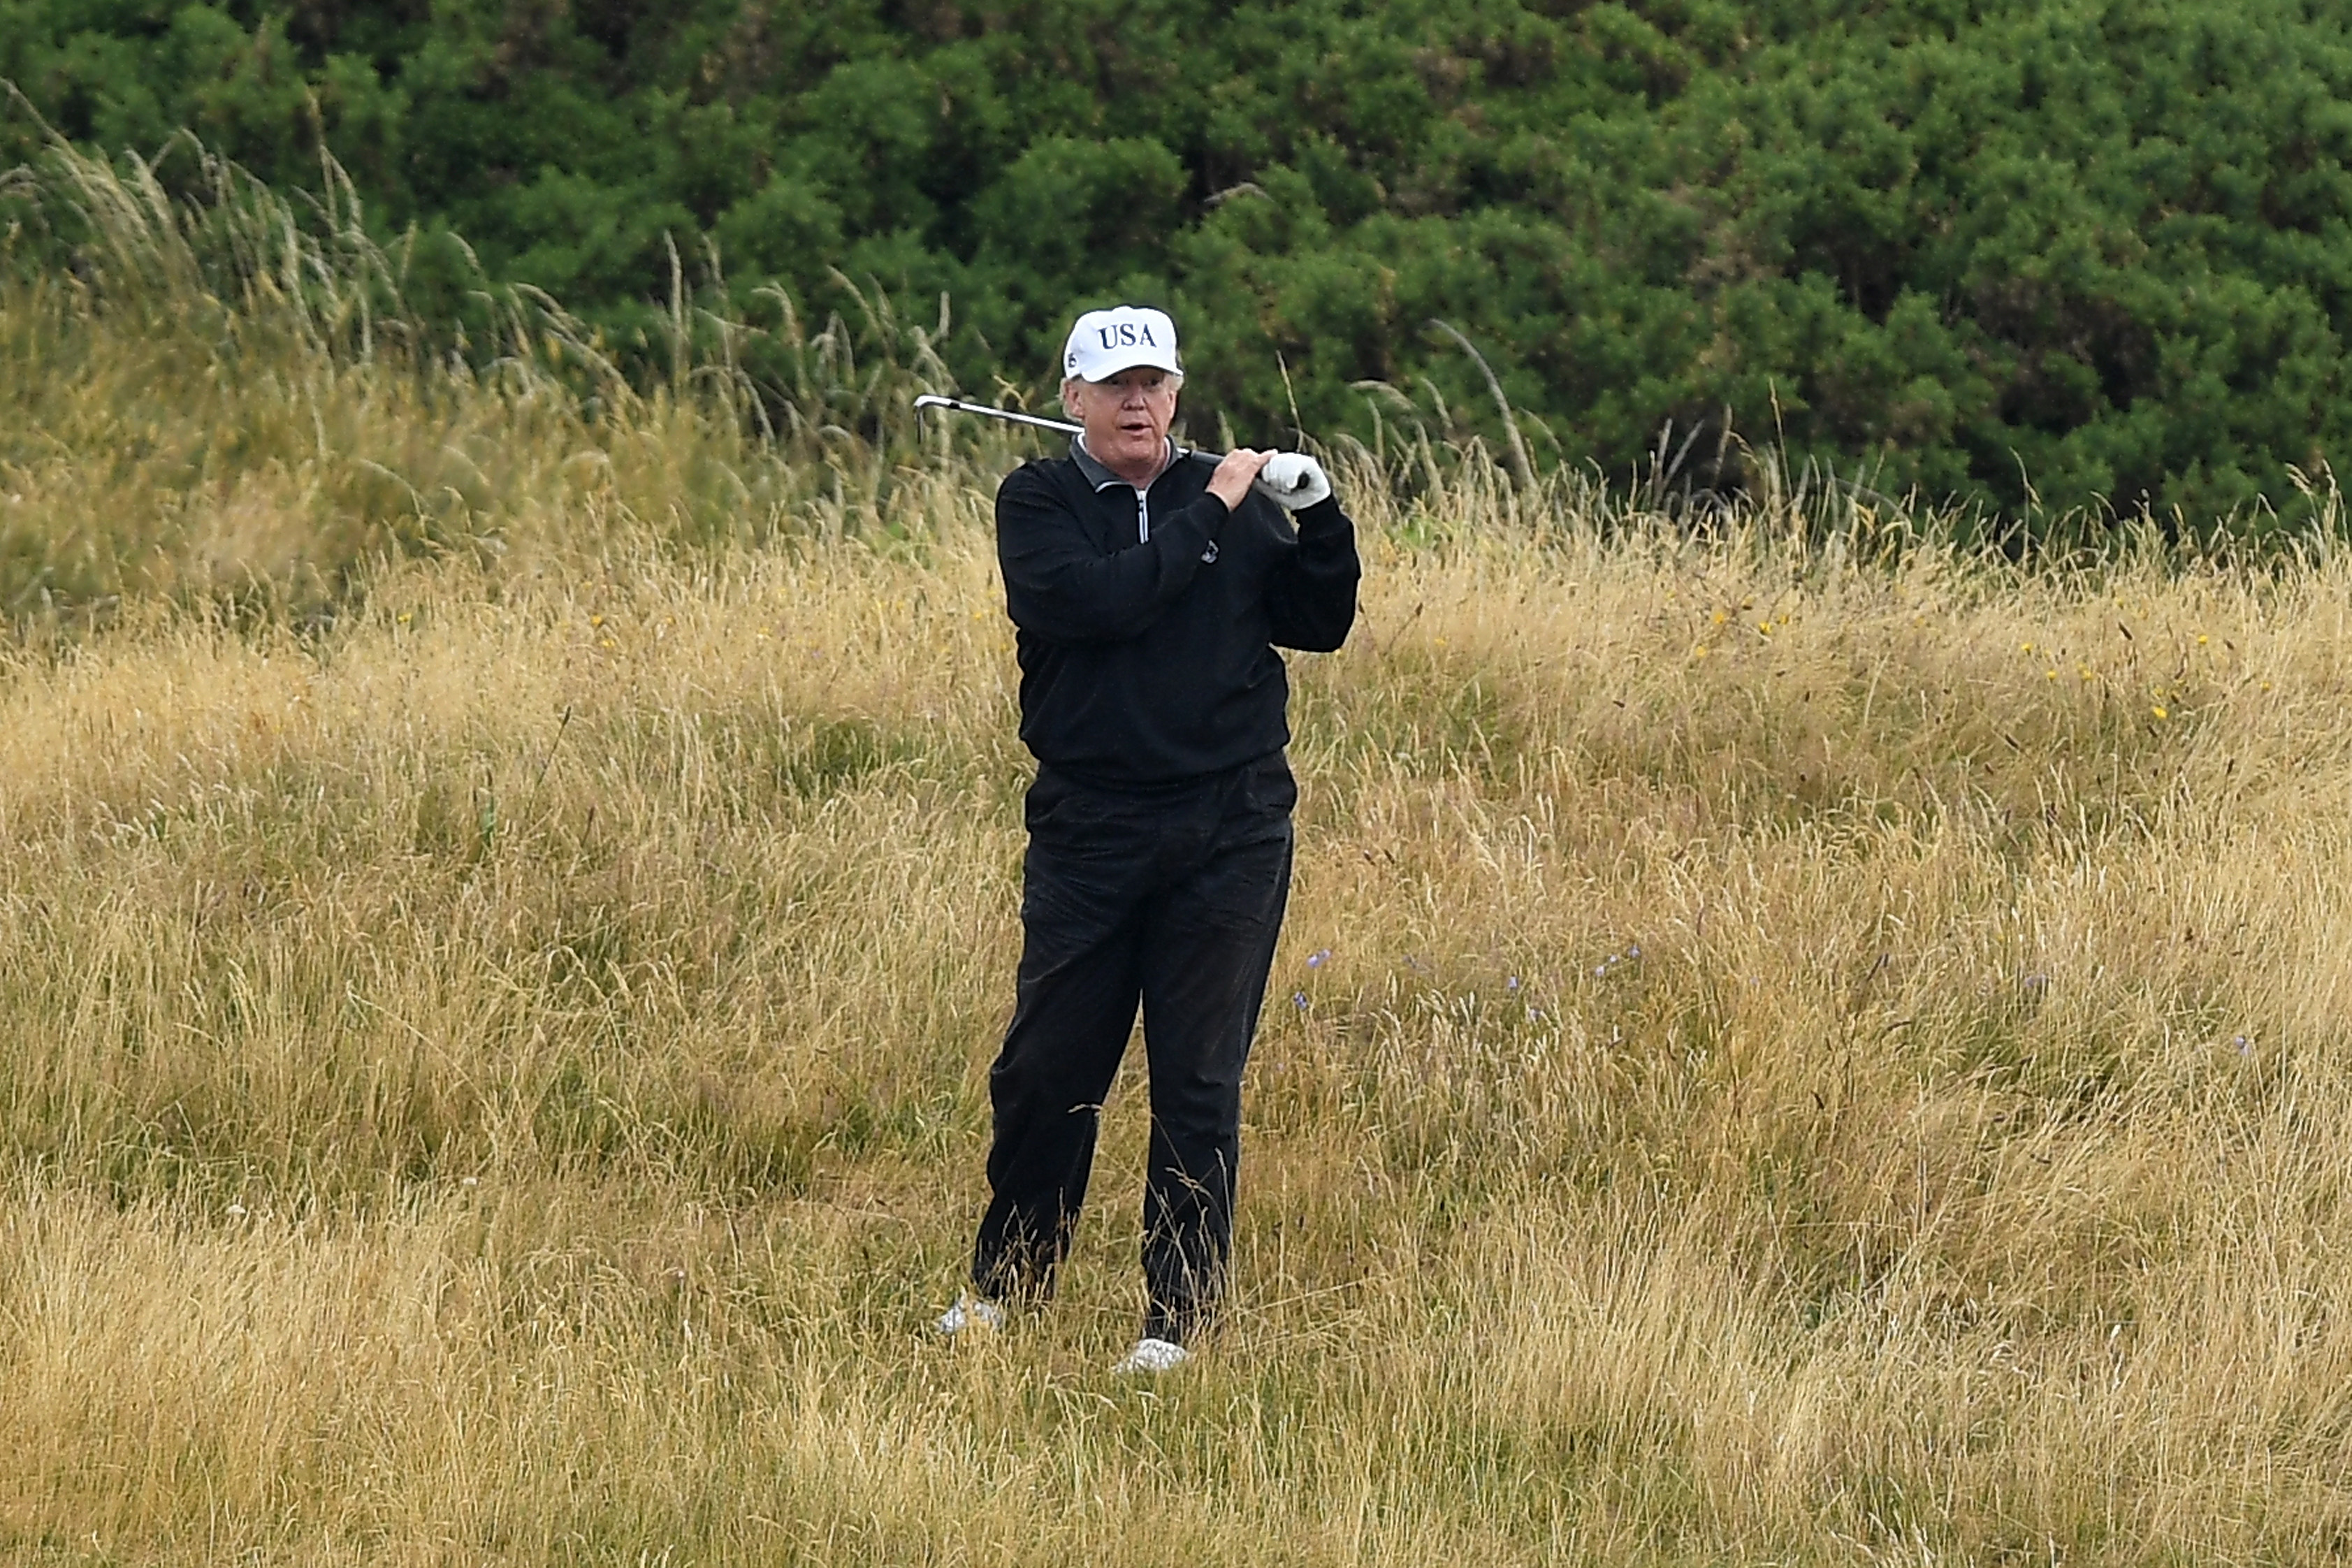 Trump’s Flagship Golf Resort has now lost $ 61 million in six years